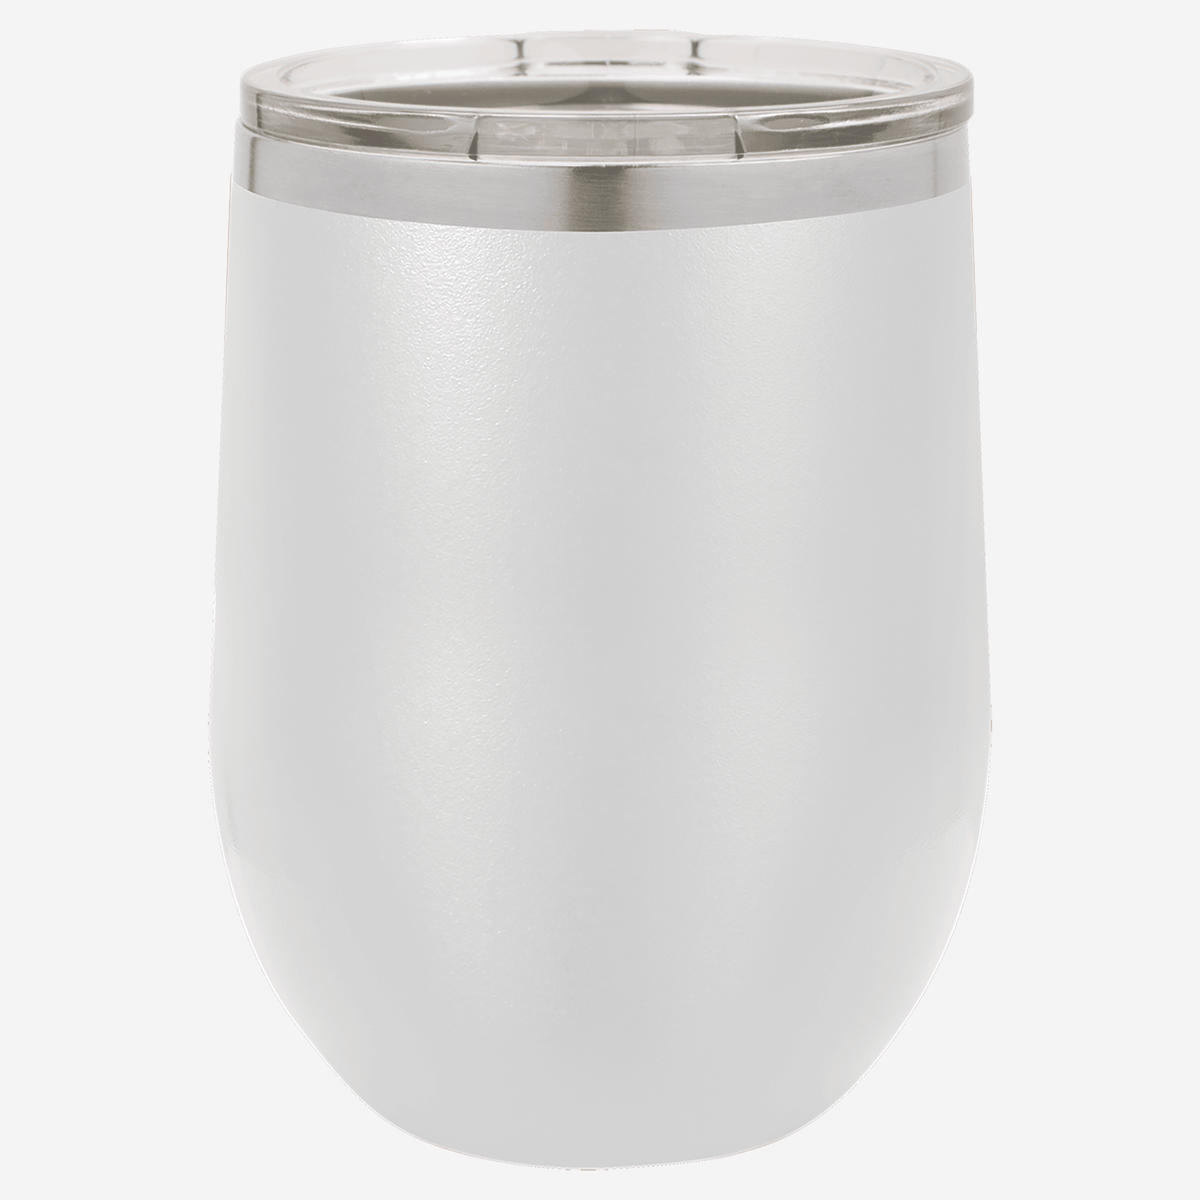 12 oz. white stainless steel tumbler with clear lid